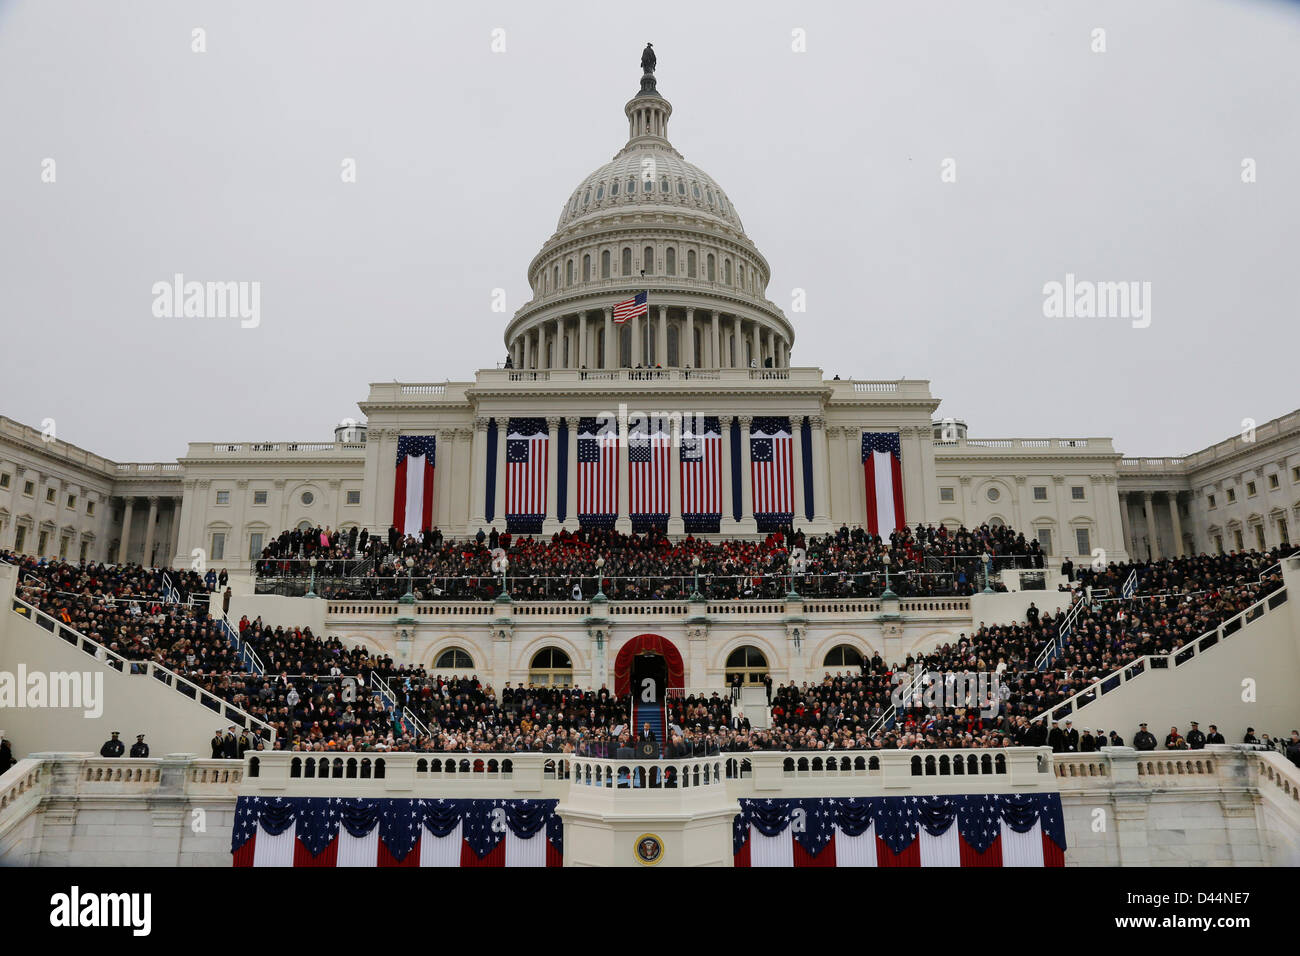 United States President Barack Obama waves to spectators after his speech at the ceremonial swearing-in at the U.S. Capitol during the 57th Presidential Inauguration in Washington, Monday, January 21, 2013. Credit: Scott Andrews / Pool via CNP Stock Photo